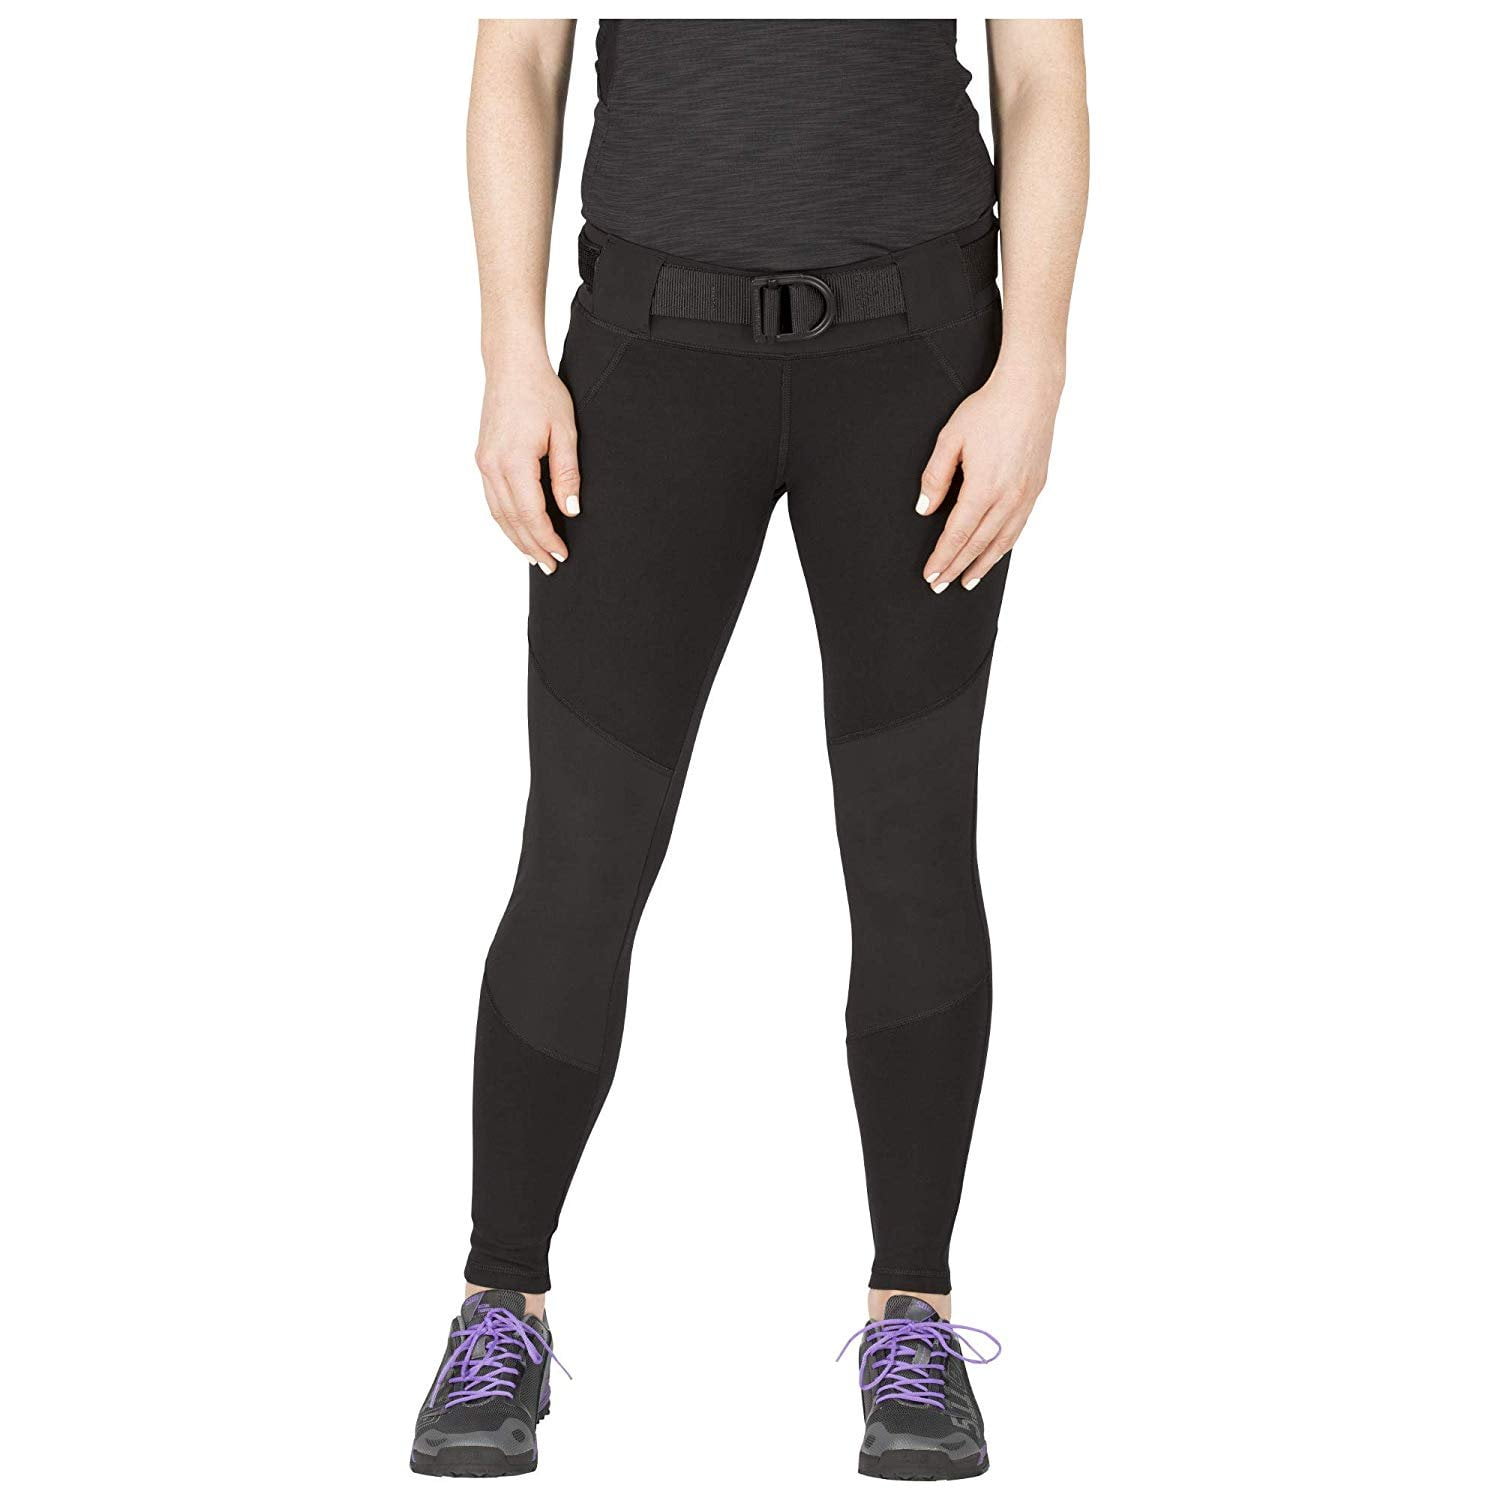 5.11 Tactical Raven Range Tight, Yoga Pants, Wicking Stretch Fabric, Belt  Loop, Style 64409, Black, Small